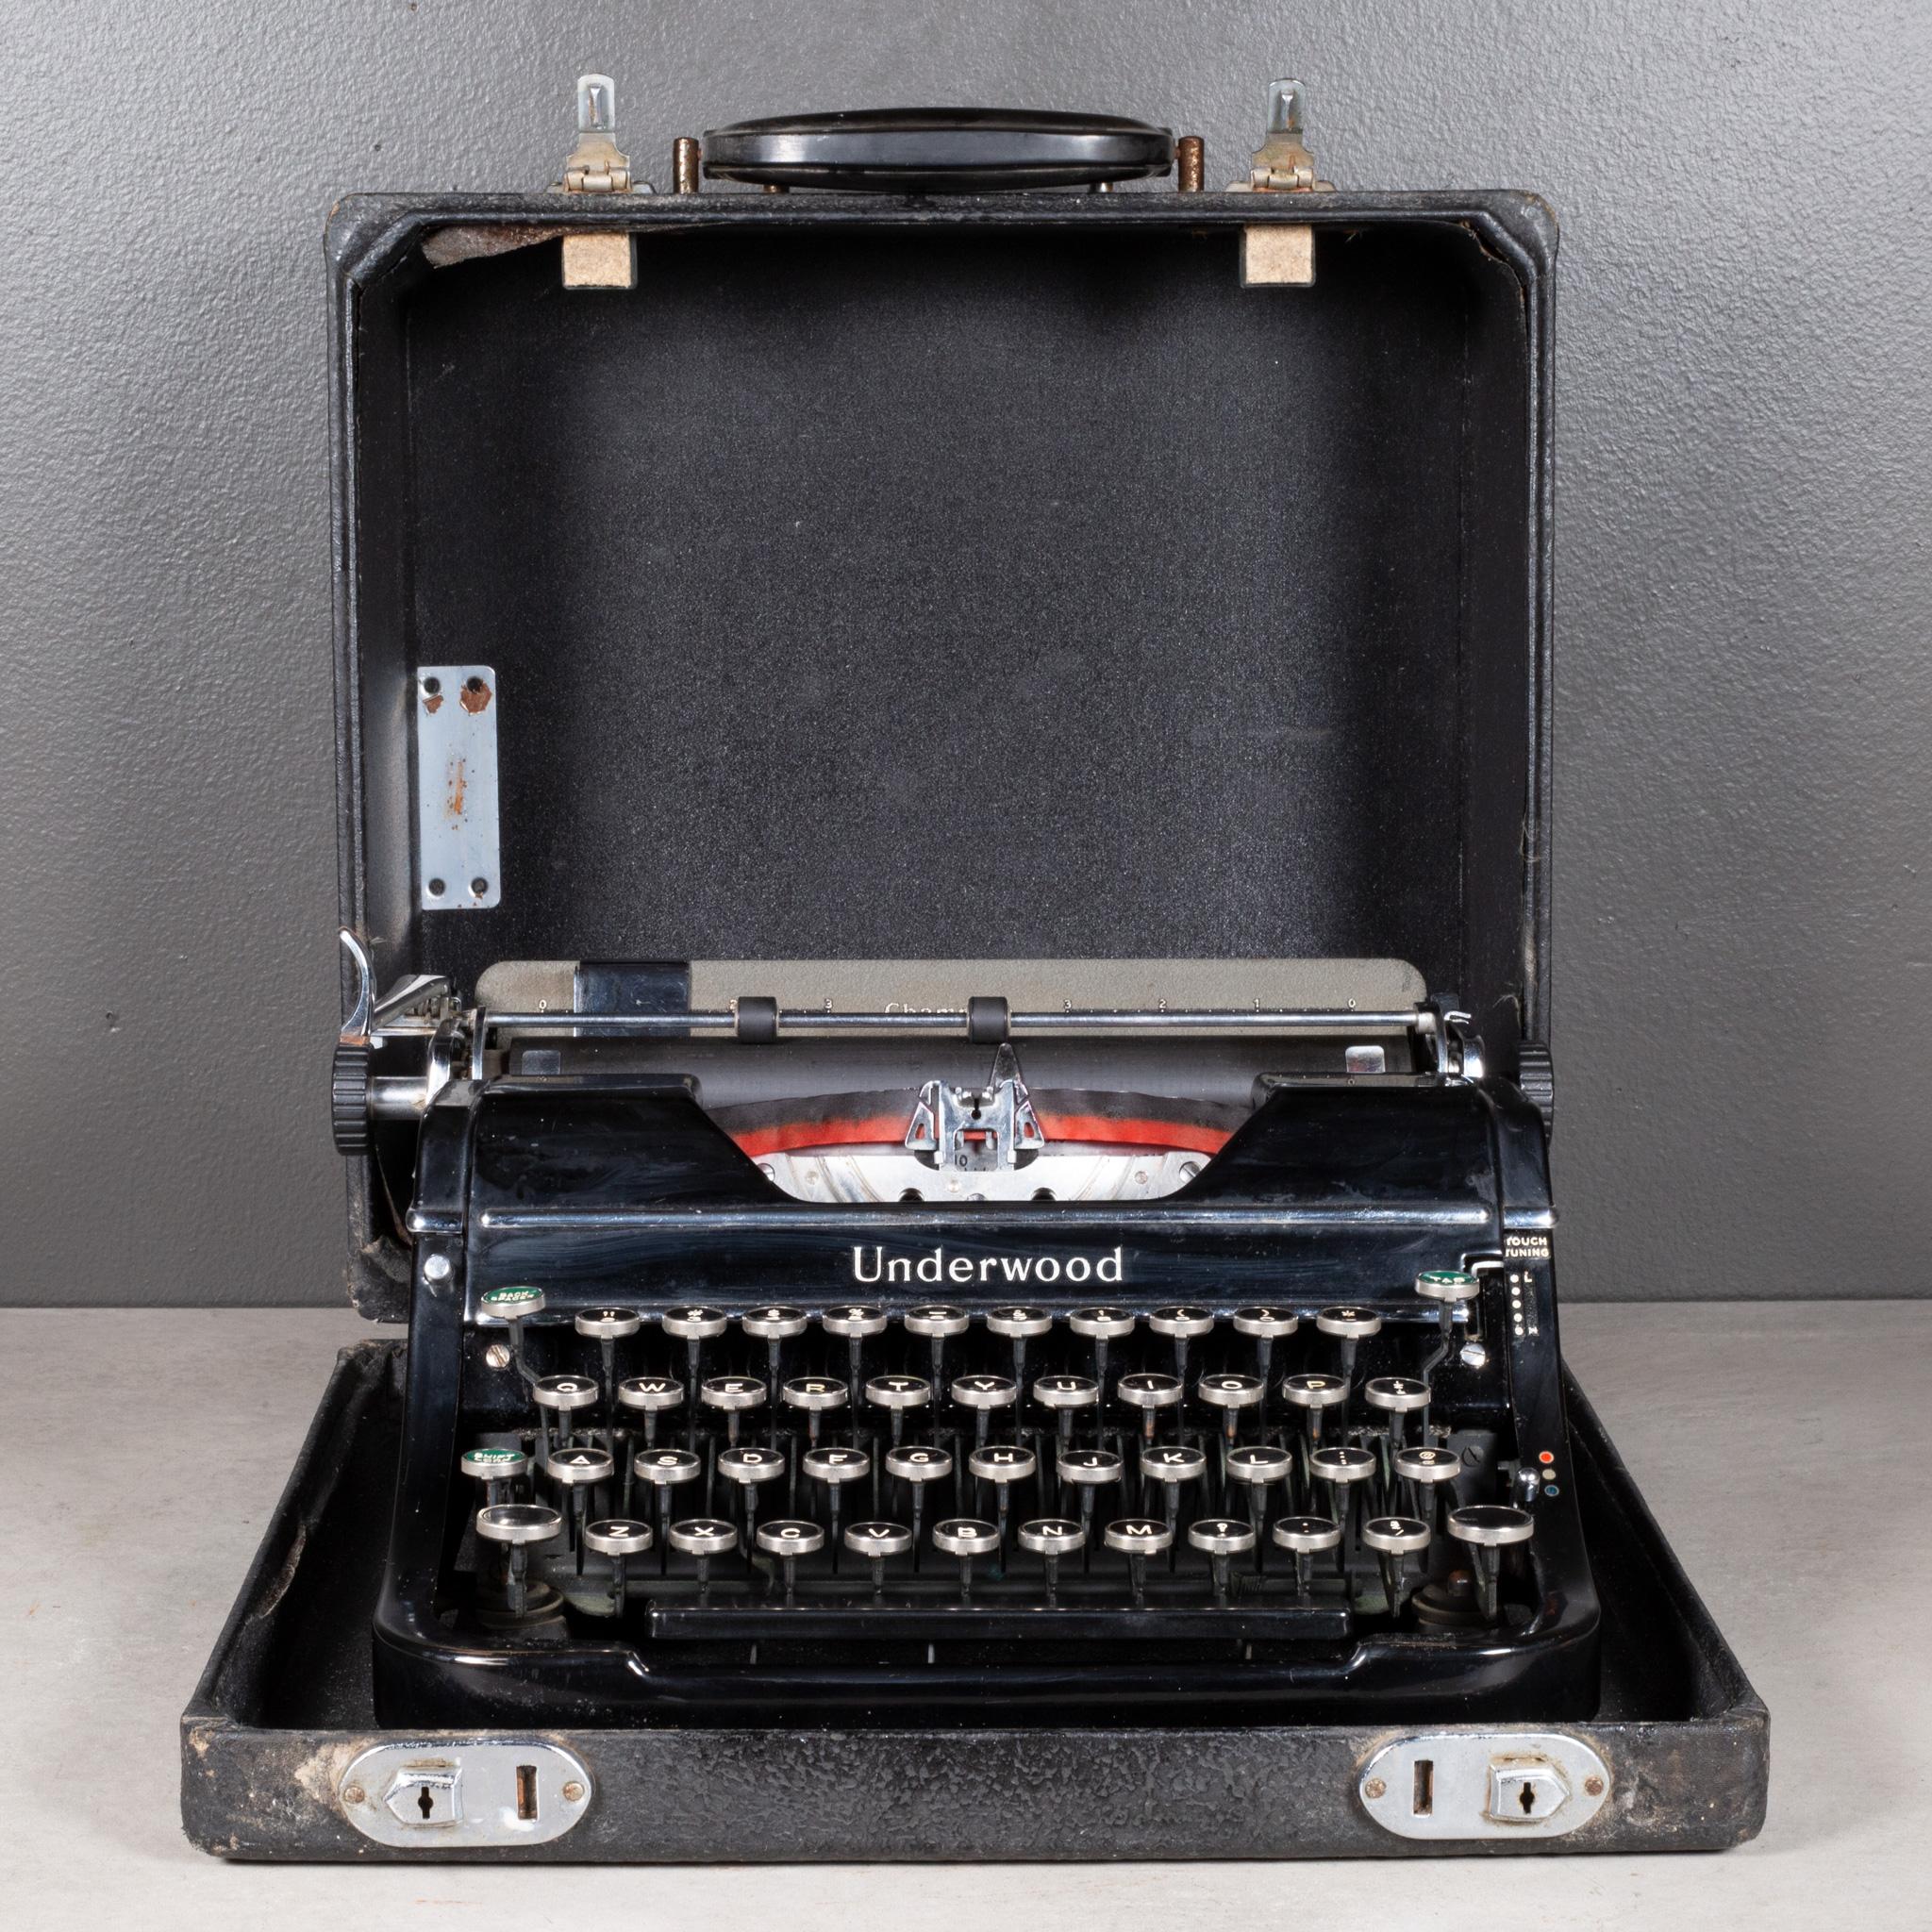 ABOUT

An Art Deco portable Underwood Champion typewriter in high gloss black finish and chrome. Bakelite and nickel keys with black and white lettering. Original Underwood lettering. This typewriter is very clean and in good working order. It has